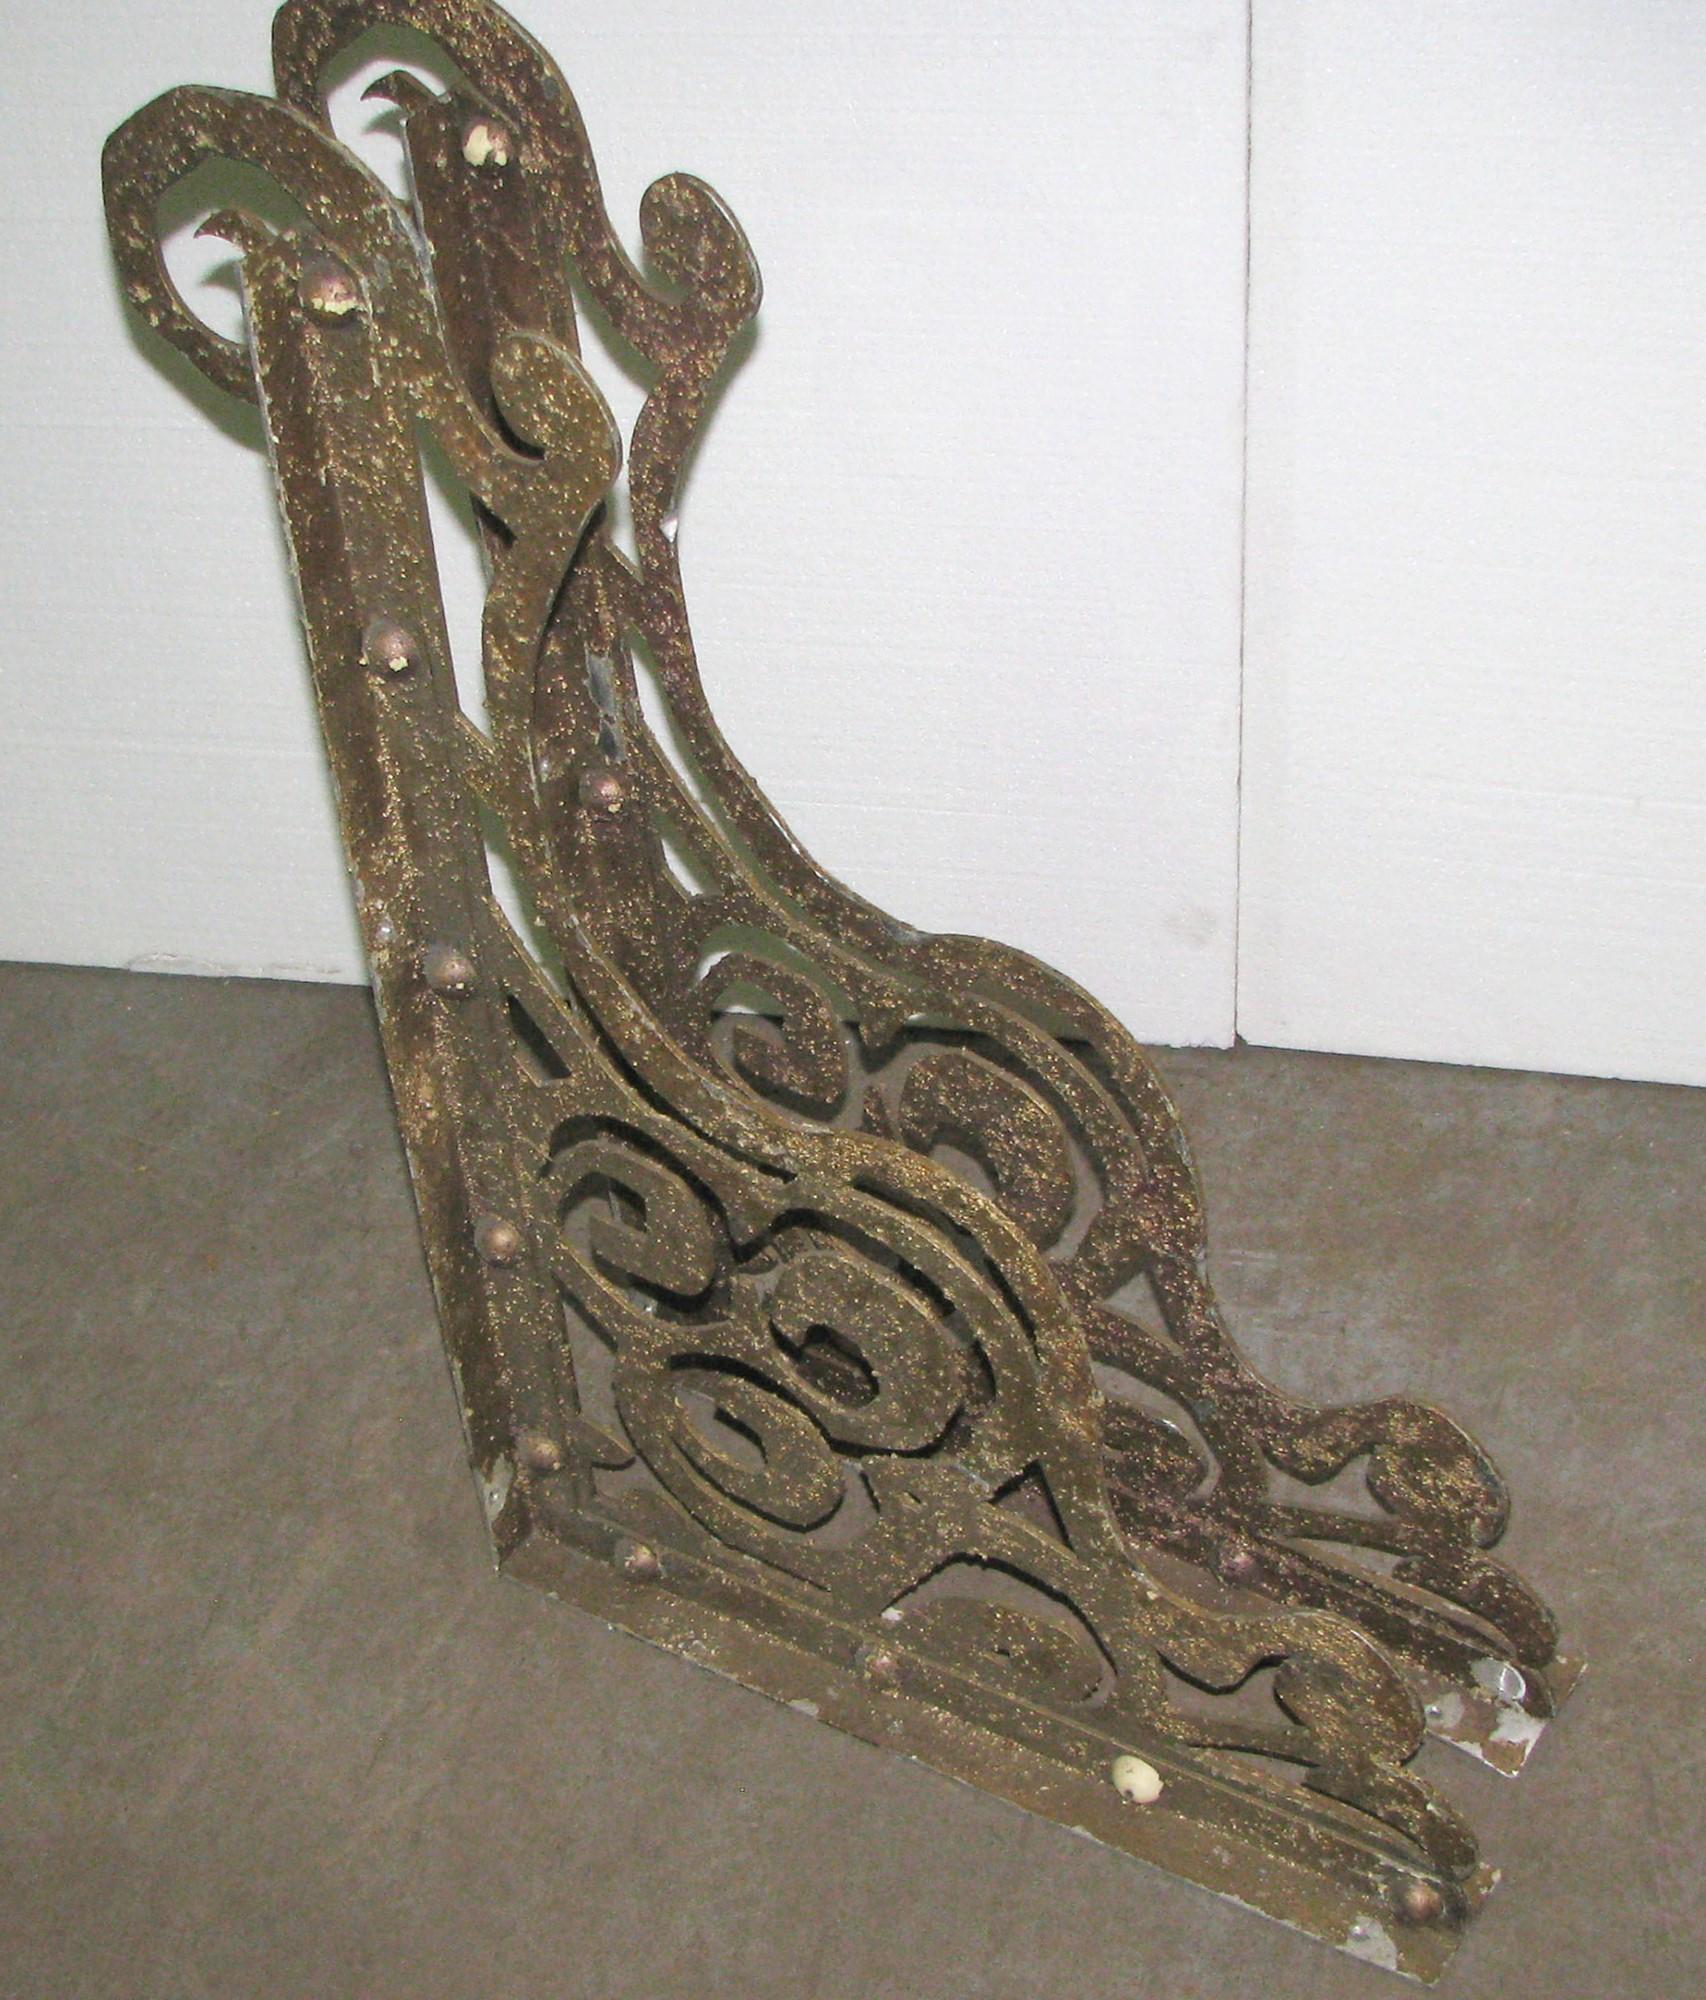 Metal 1890s Pair of Ornate Architectural Steel Brackets from Manhattan Fire Escape